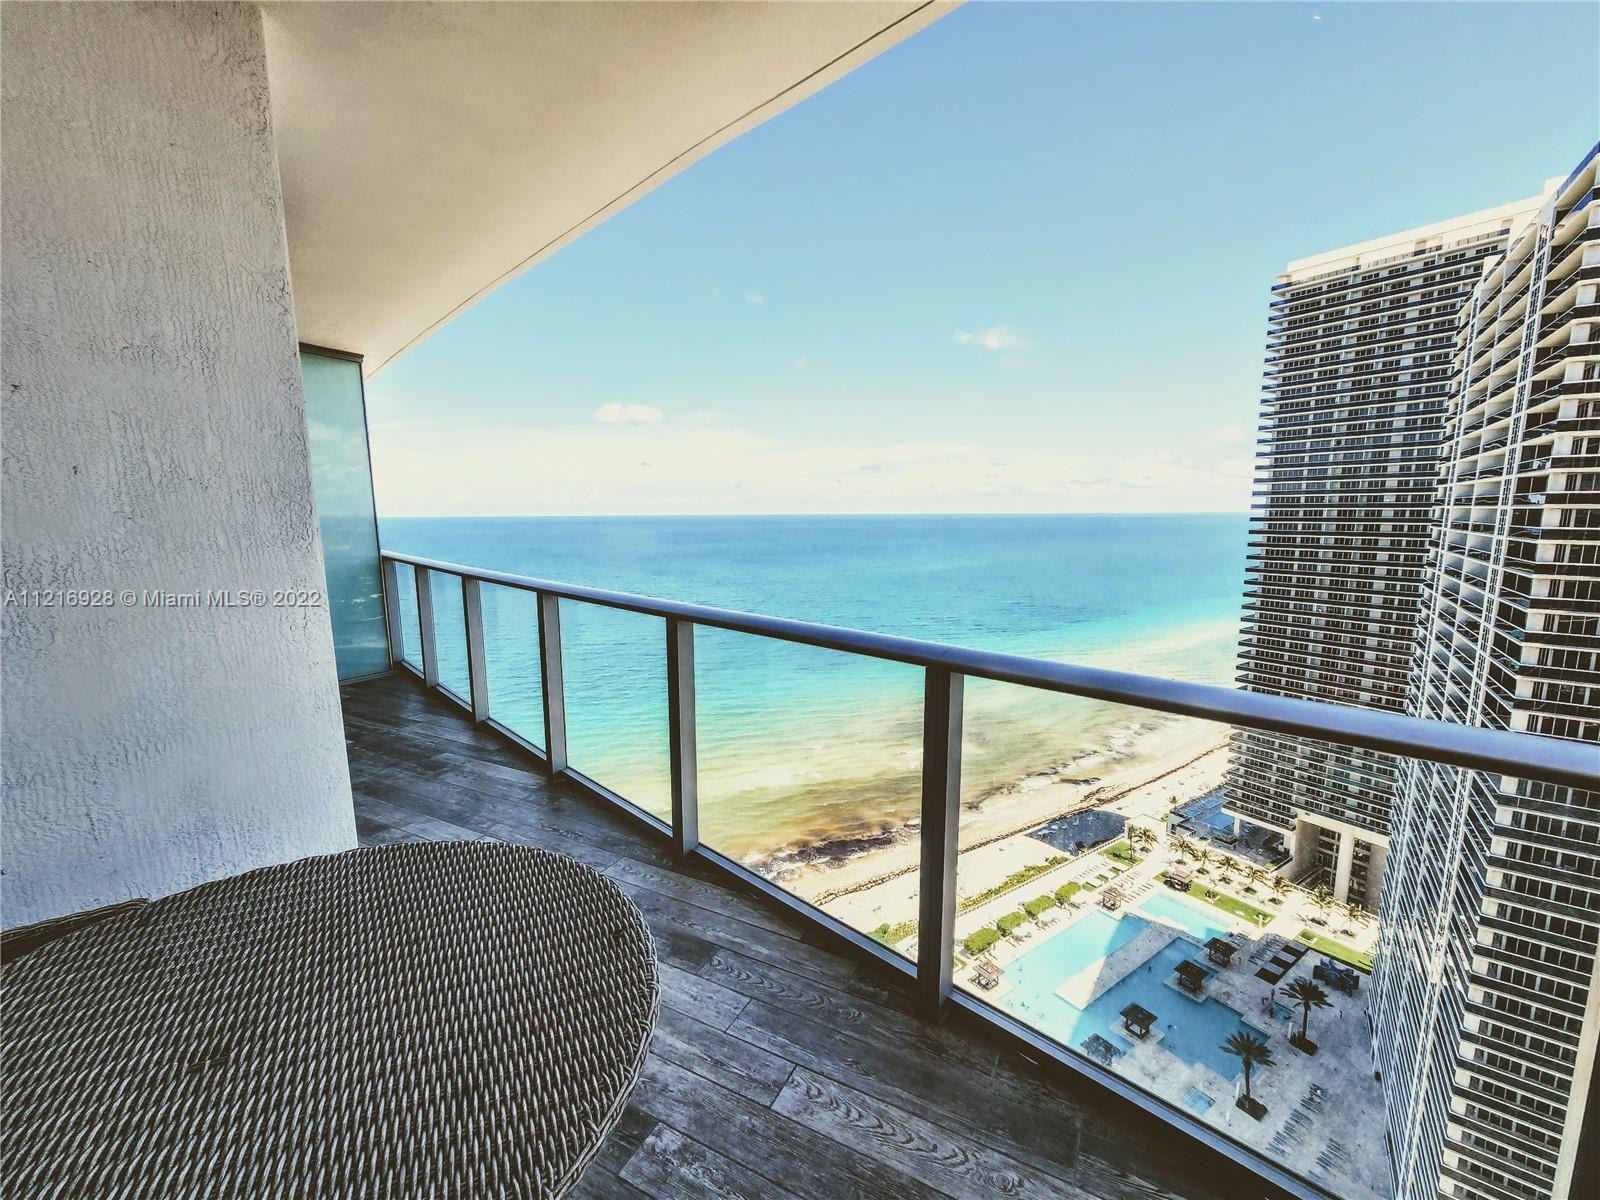 AMAZING  2 BEDROOMS  2 BATHS unit facing South ON THE 30TH floor, with views overlooking the pool, b